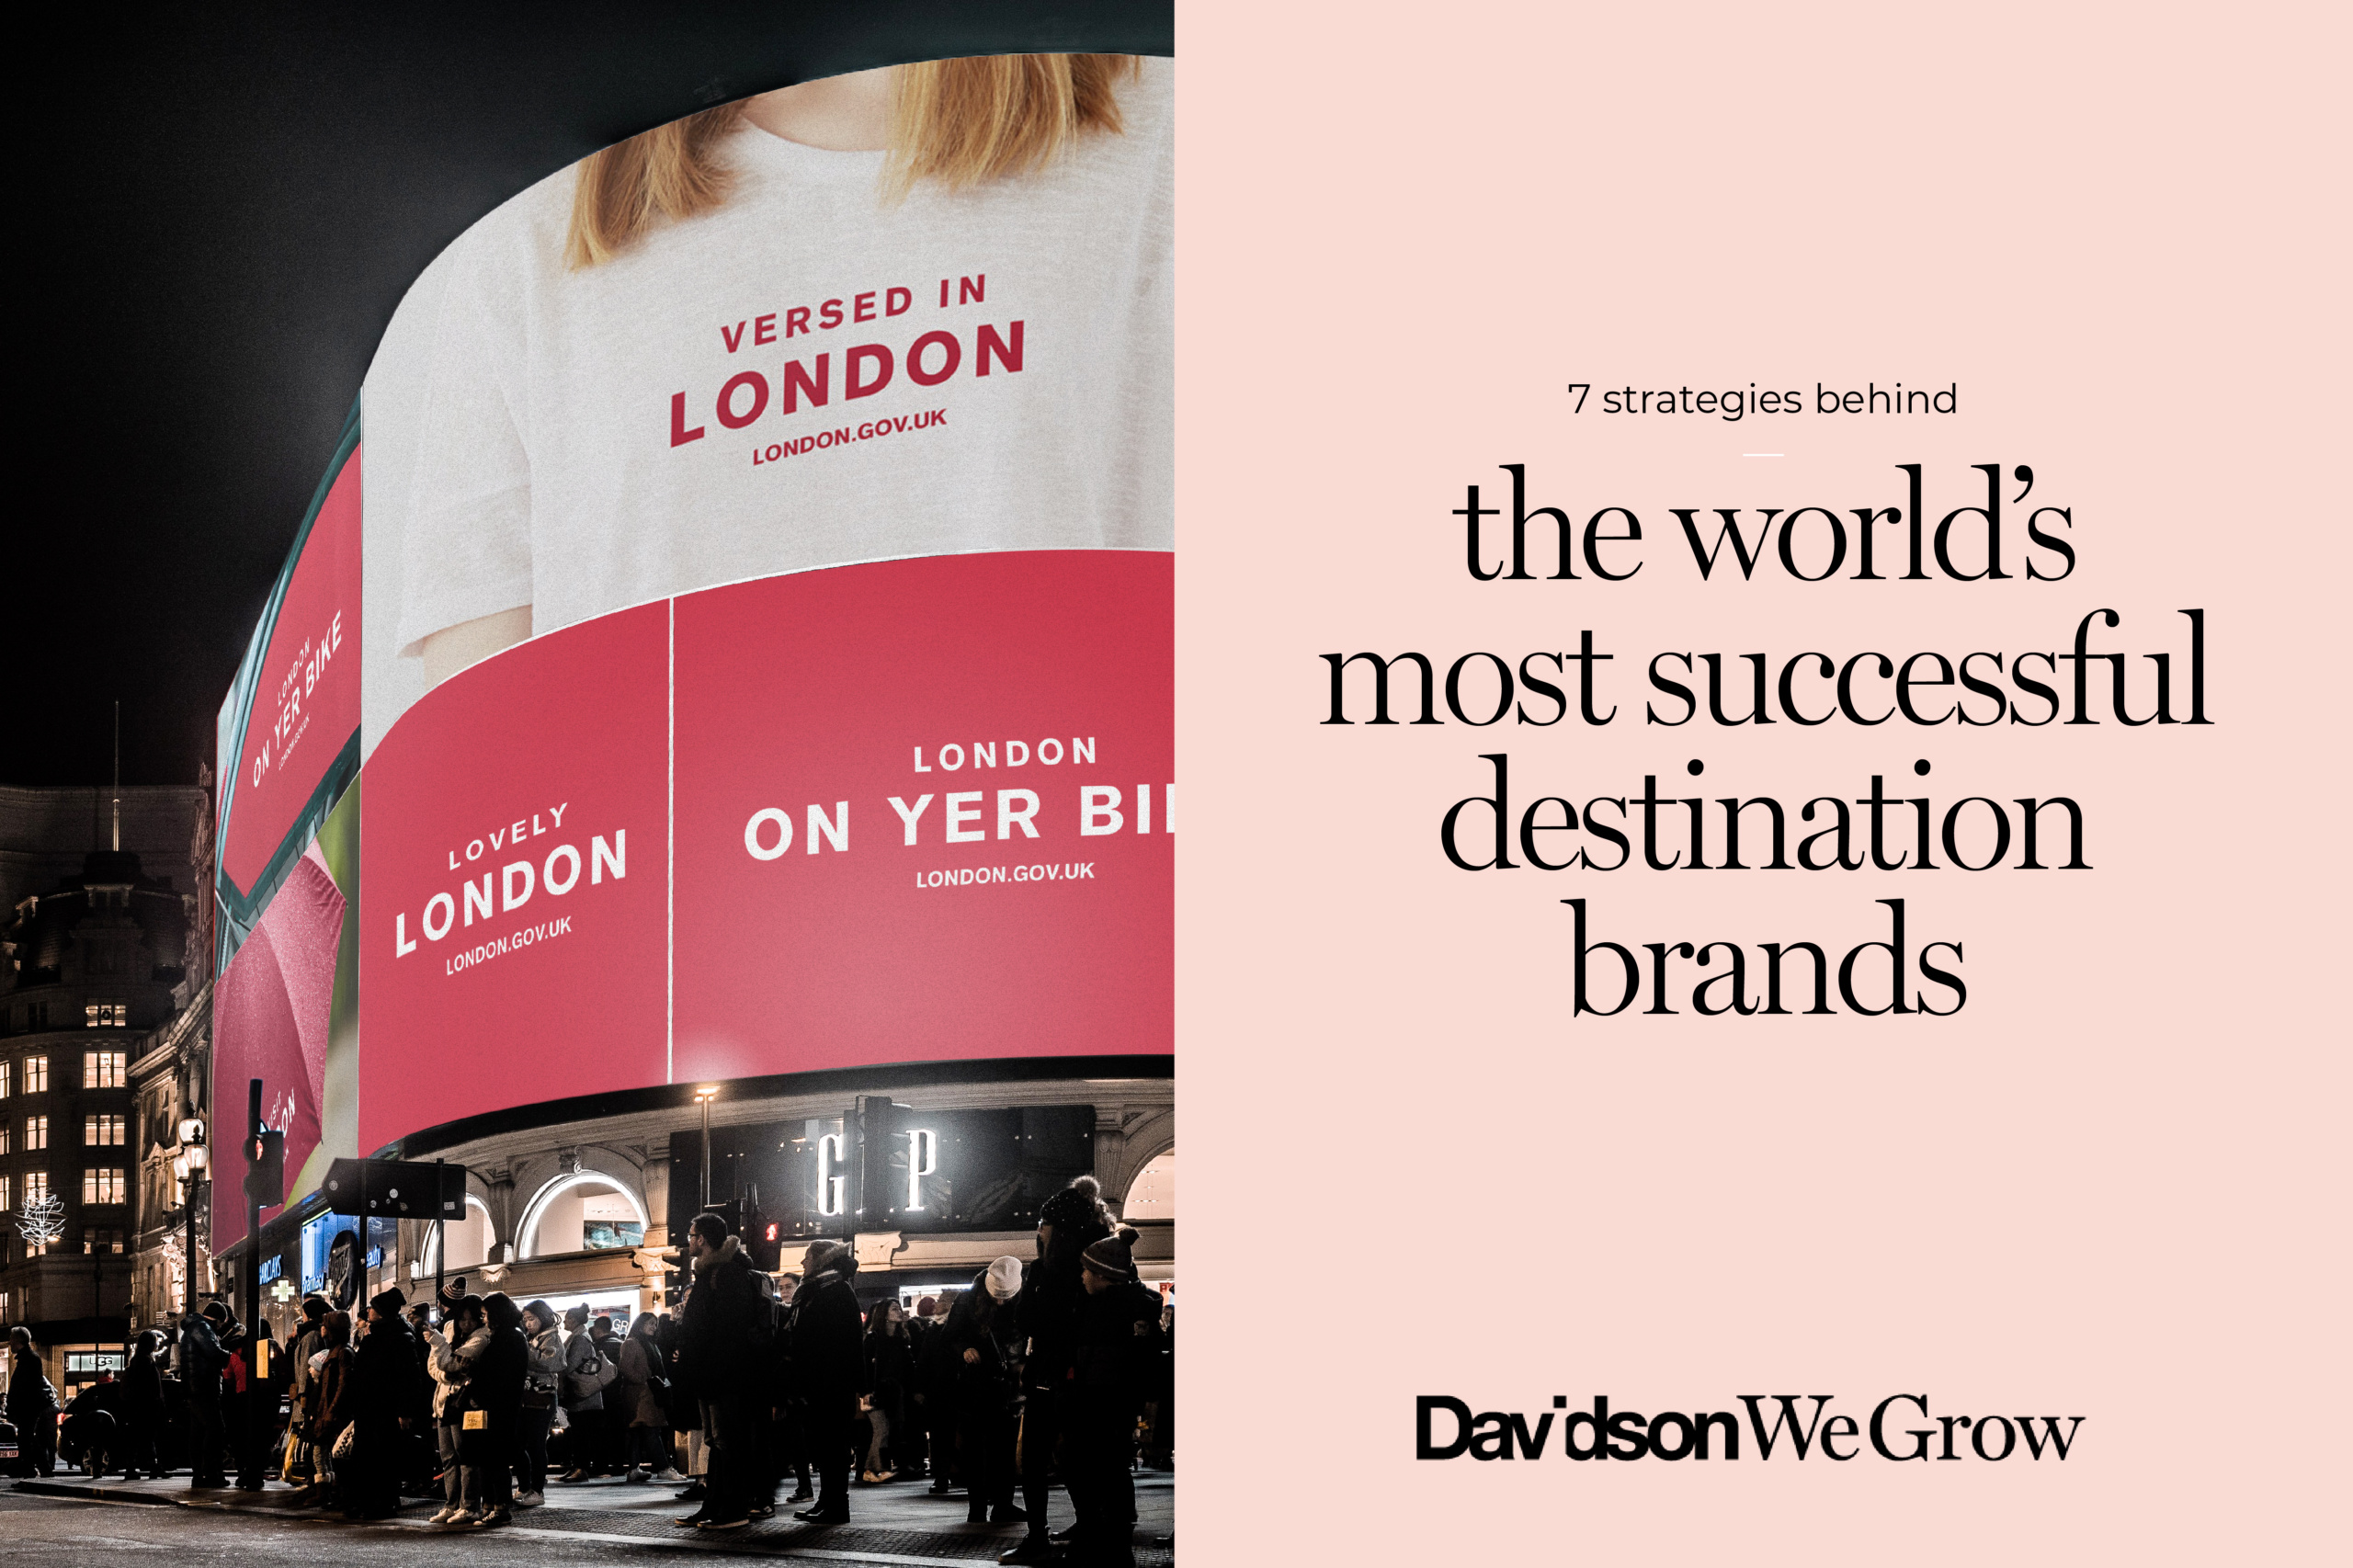 7 strategies behind the world's most successful destination brands